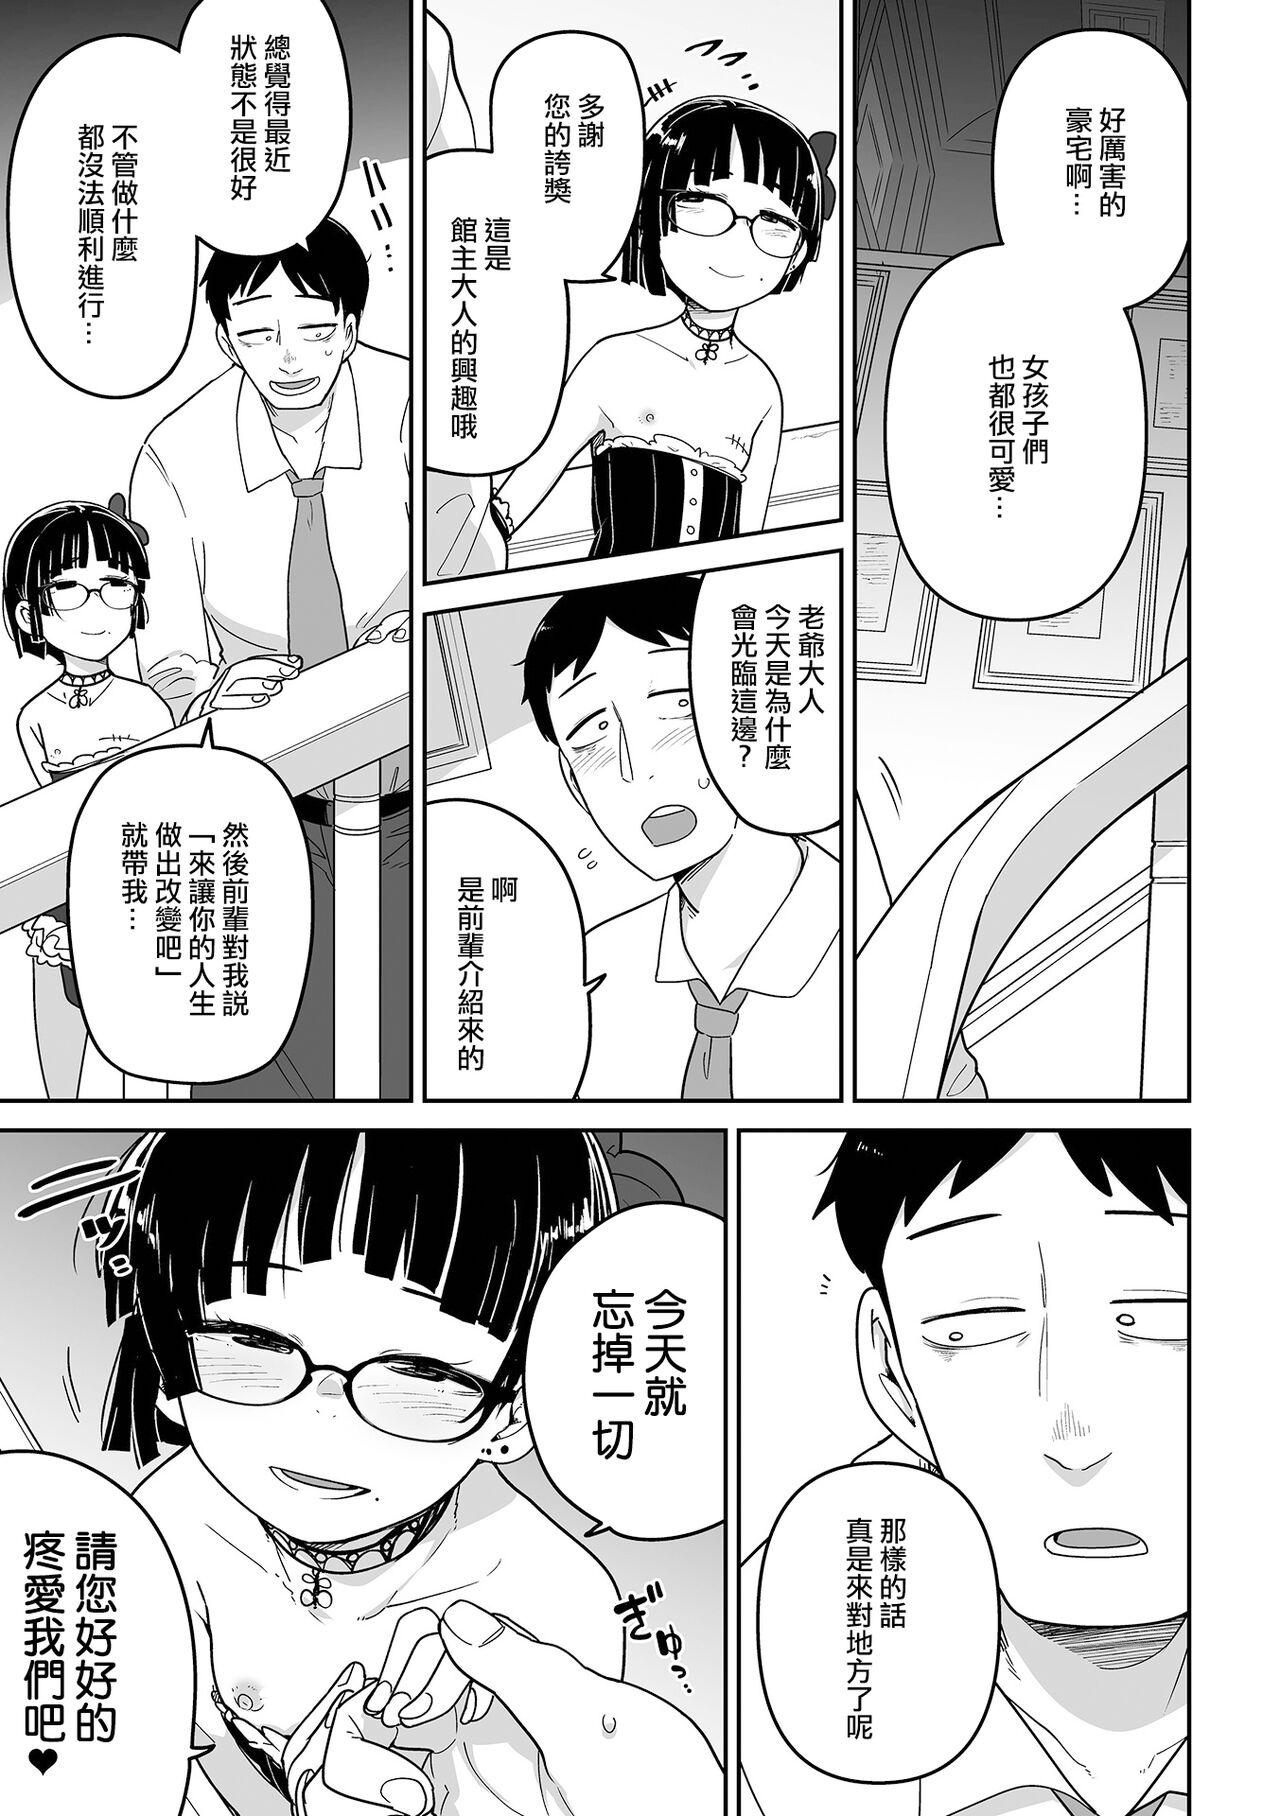 Amature Sex Kesson Shoukan e Youkoso | 歡迎來到殘缺娼館！ Pay - Page 4